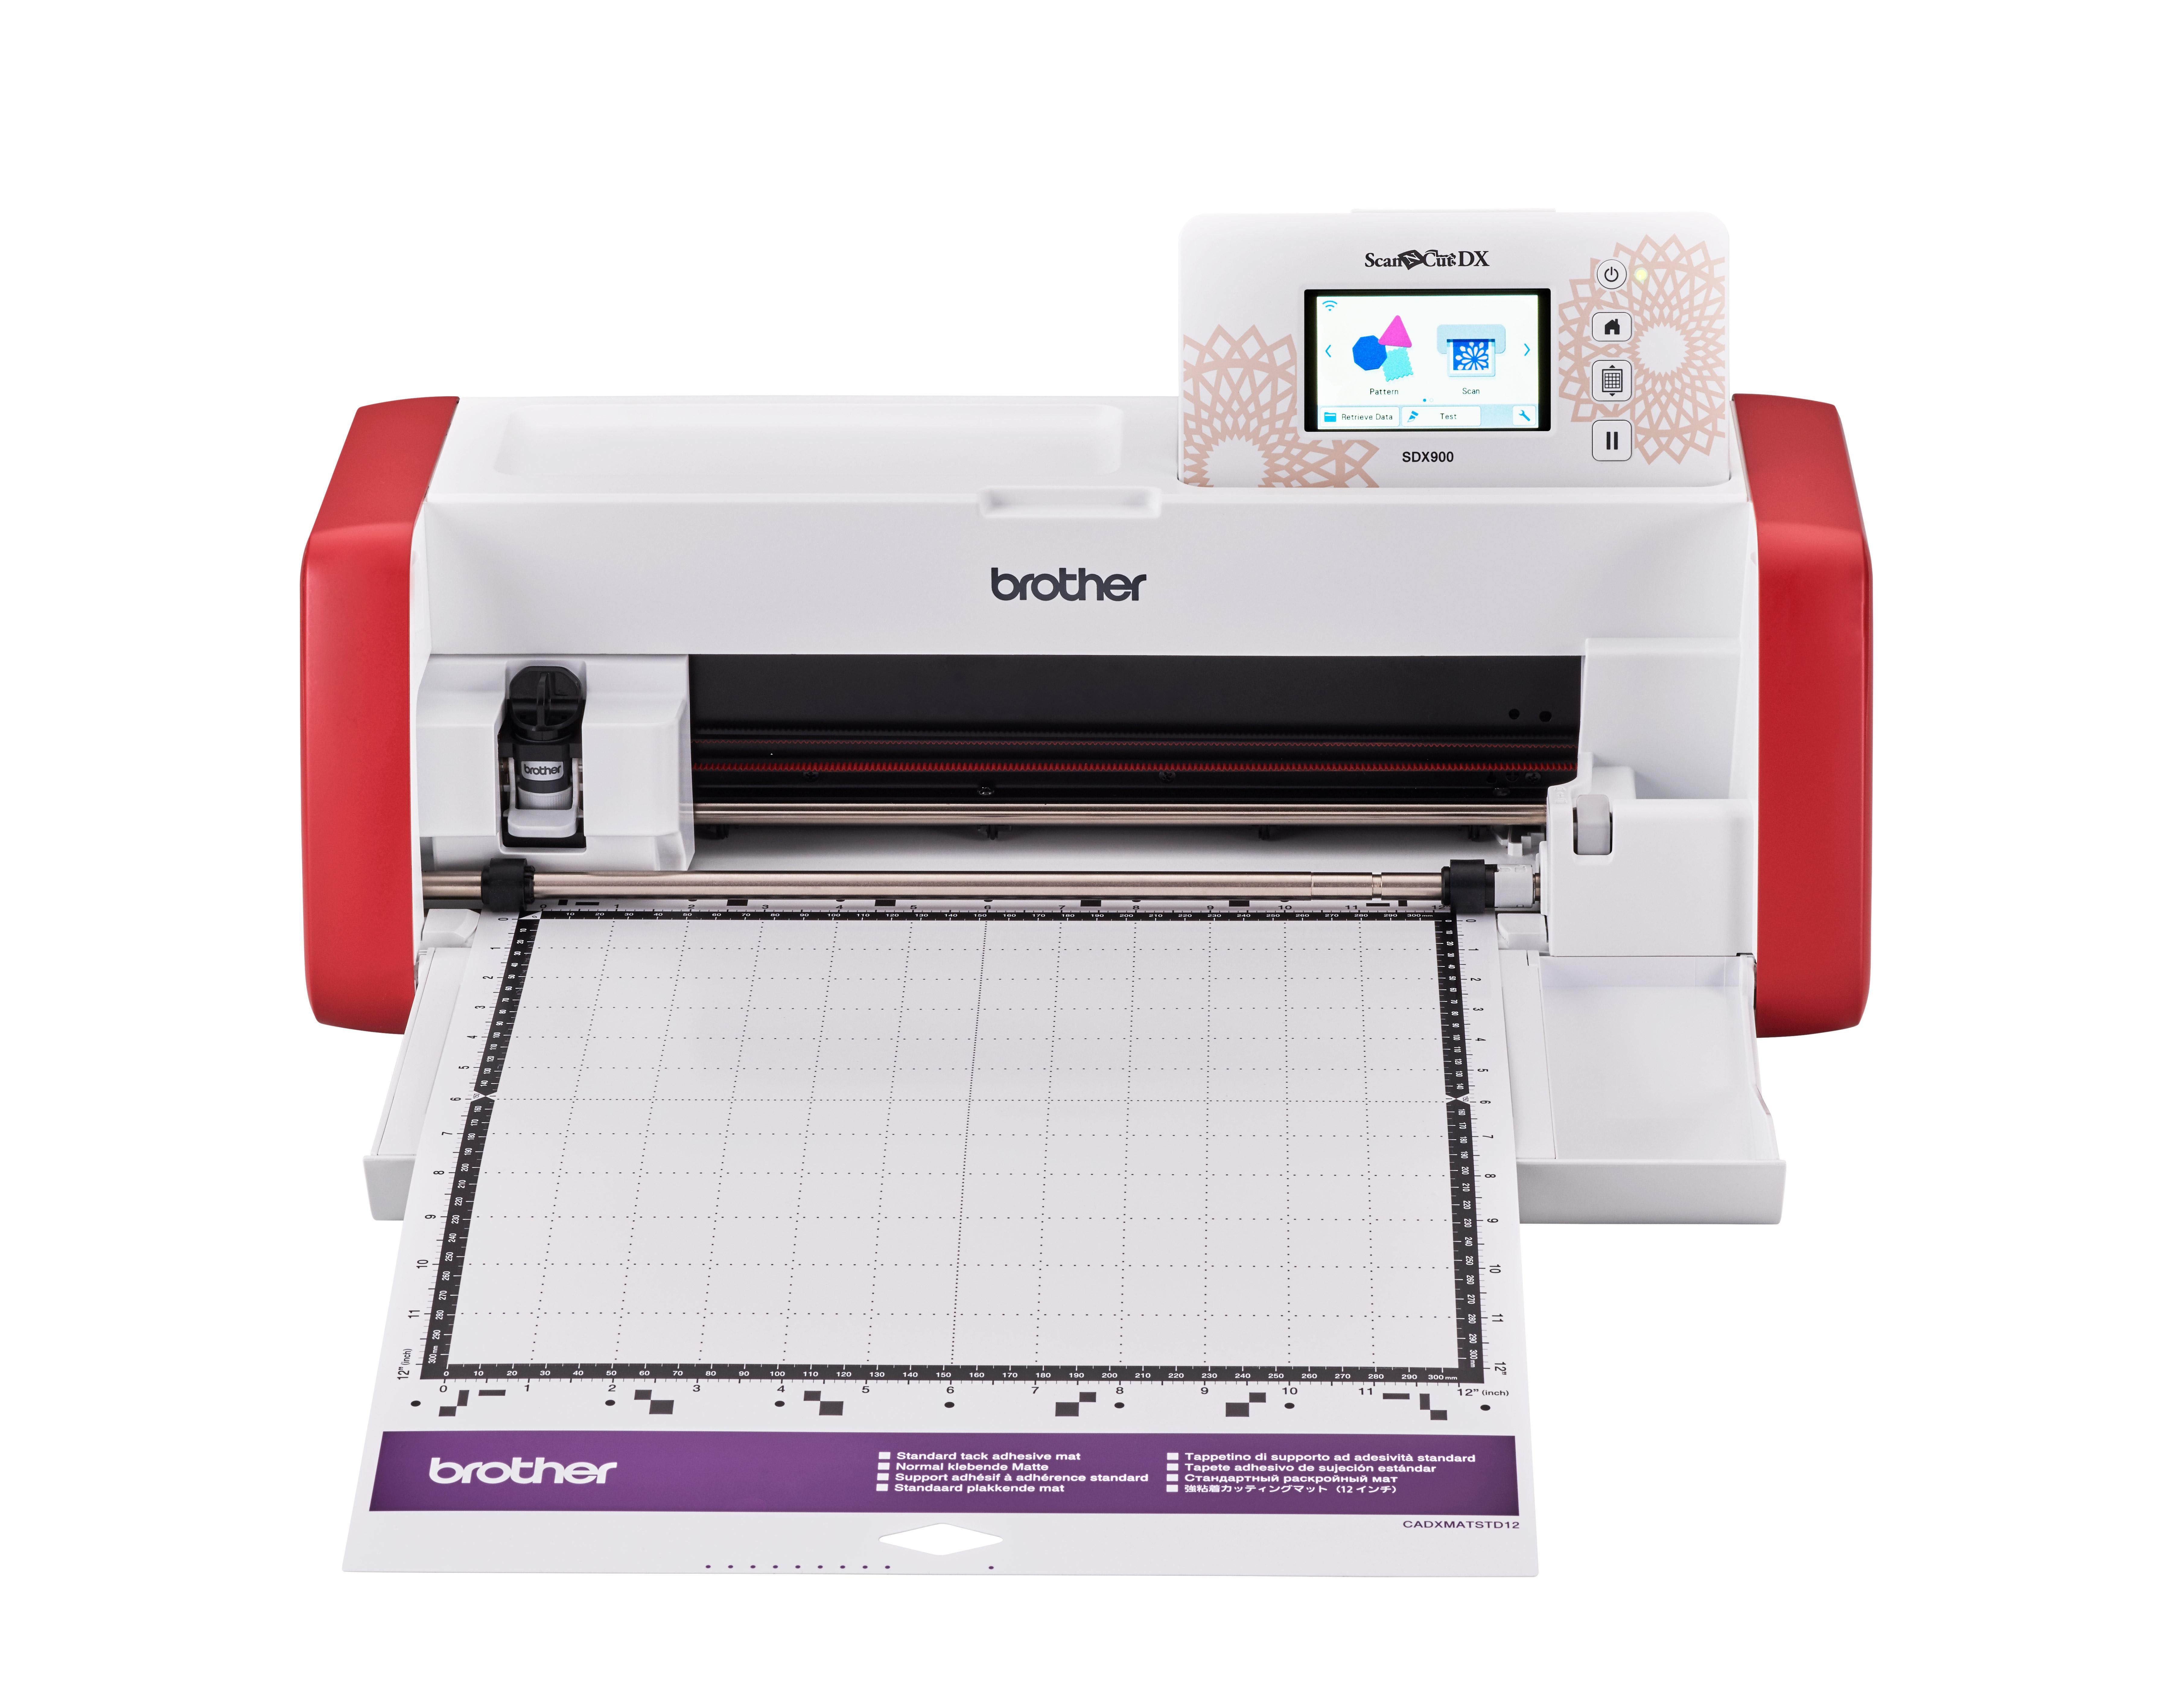 BROTHER ScanNCut DX900 Plotter